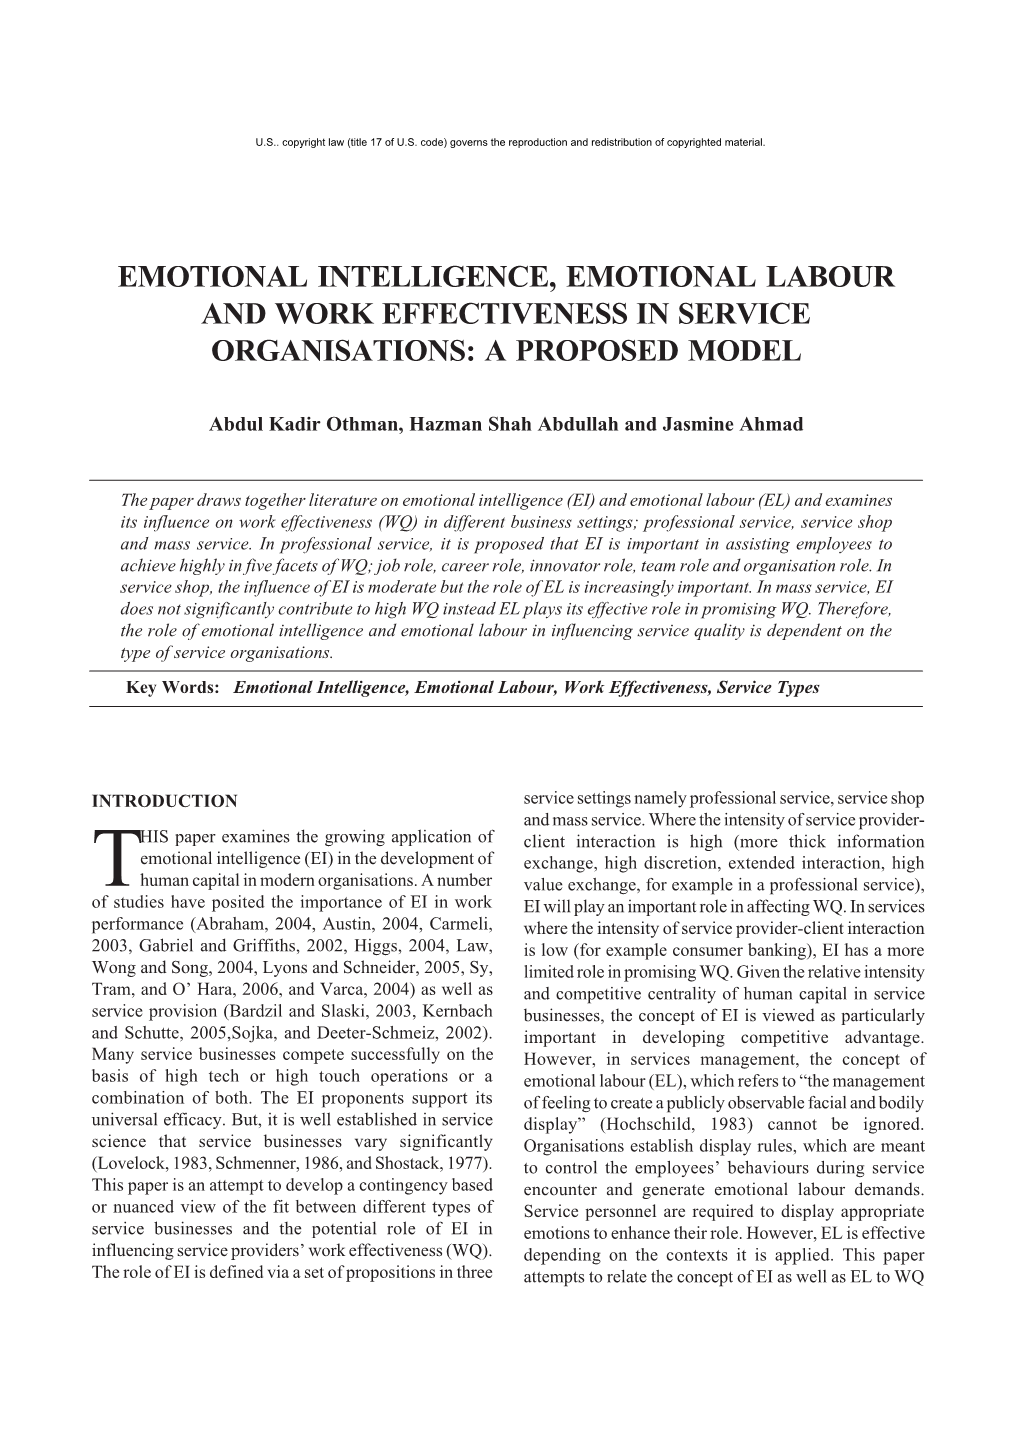 Emotional Intelligence, Emotional Labour and Work Effectiveness in Service Organisations: a Proposed Model